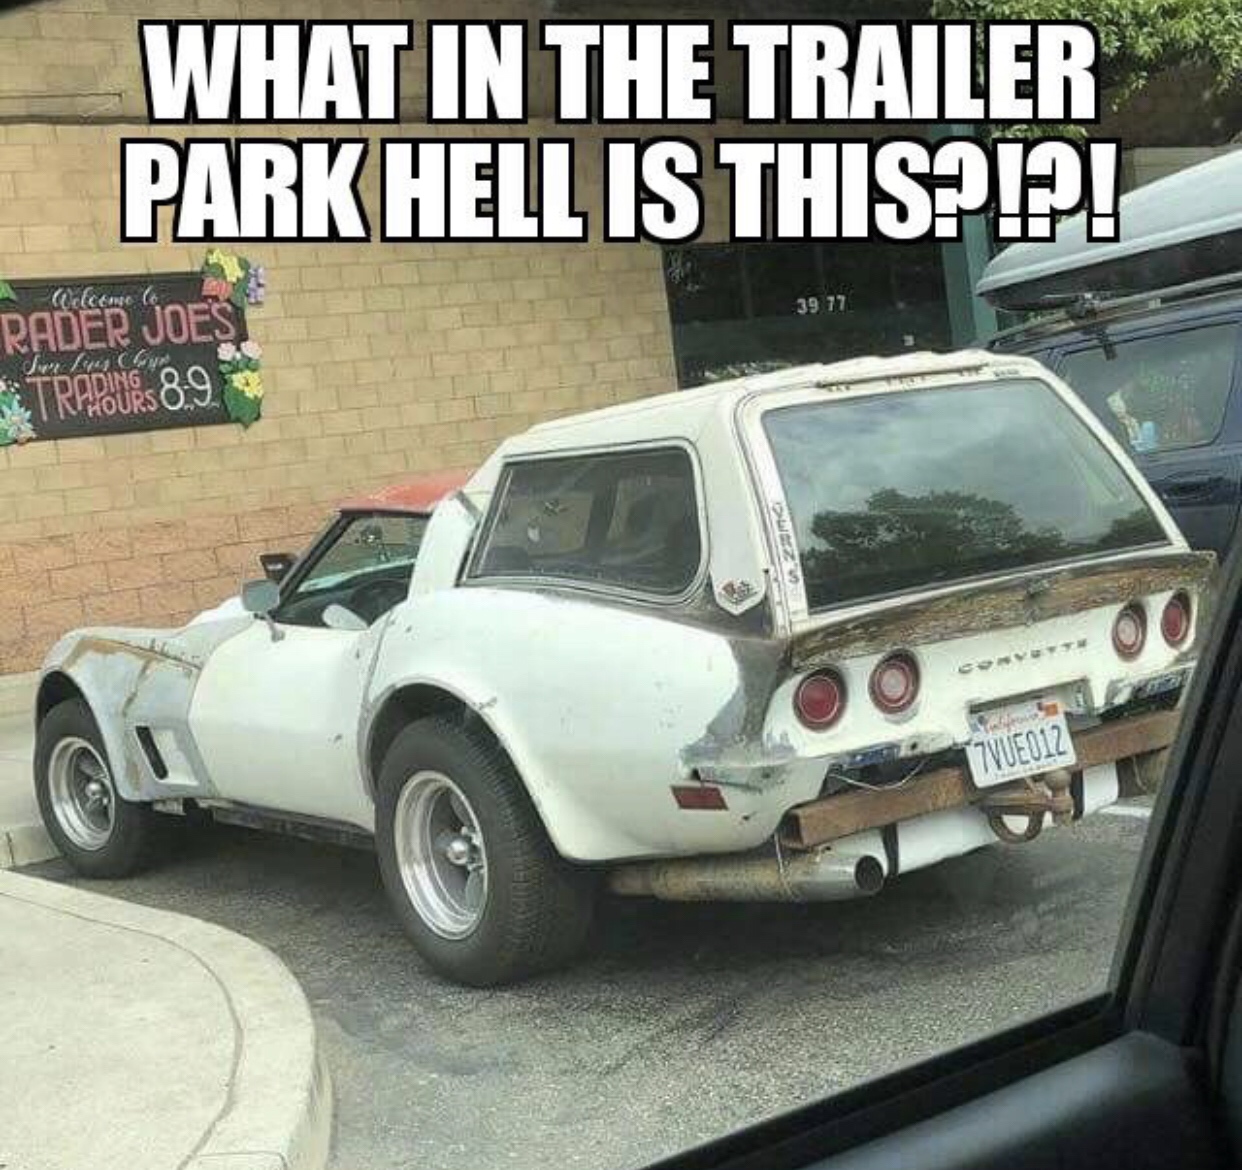 trailer park hell - What In The Trailer Park Hell Is This?!?! lo Rader Joes Jux Trapours 8.9 012